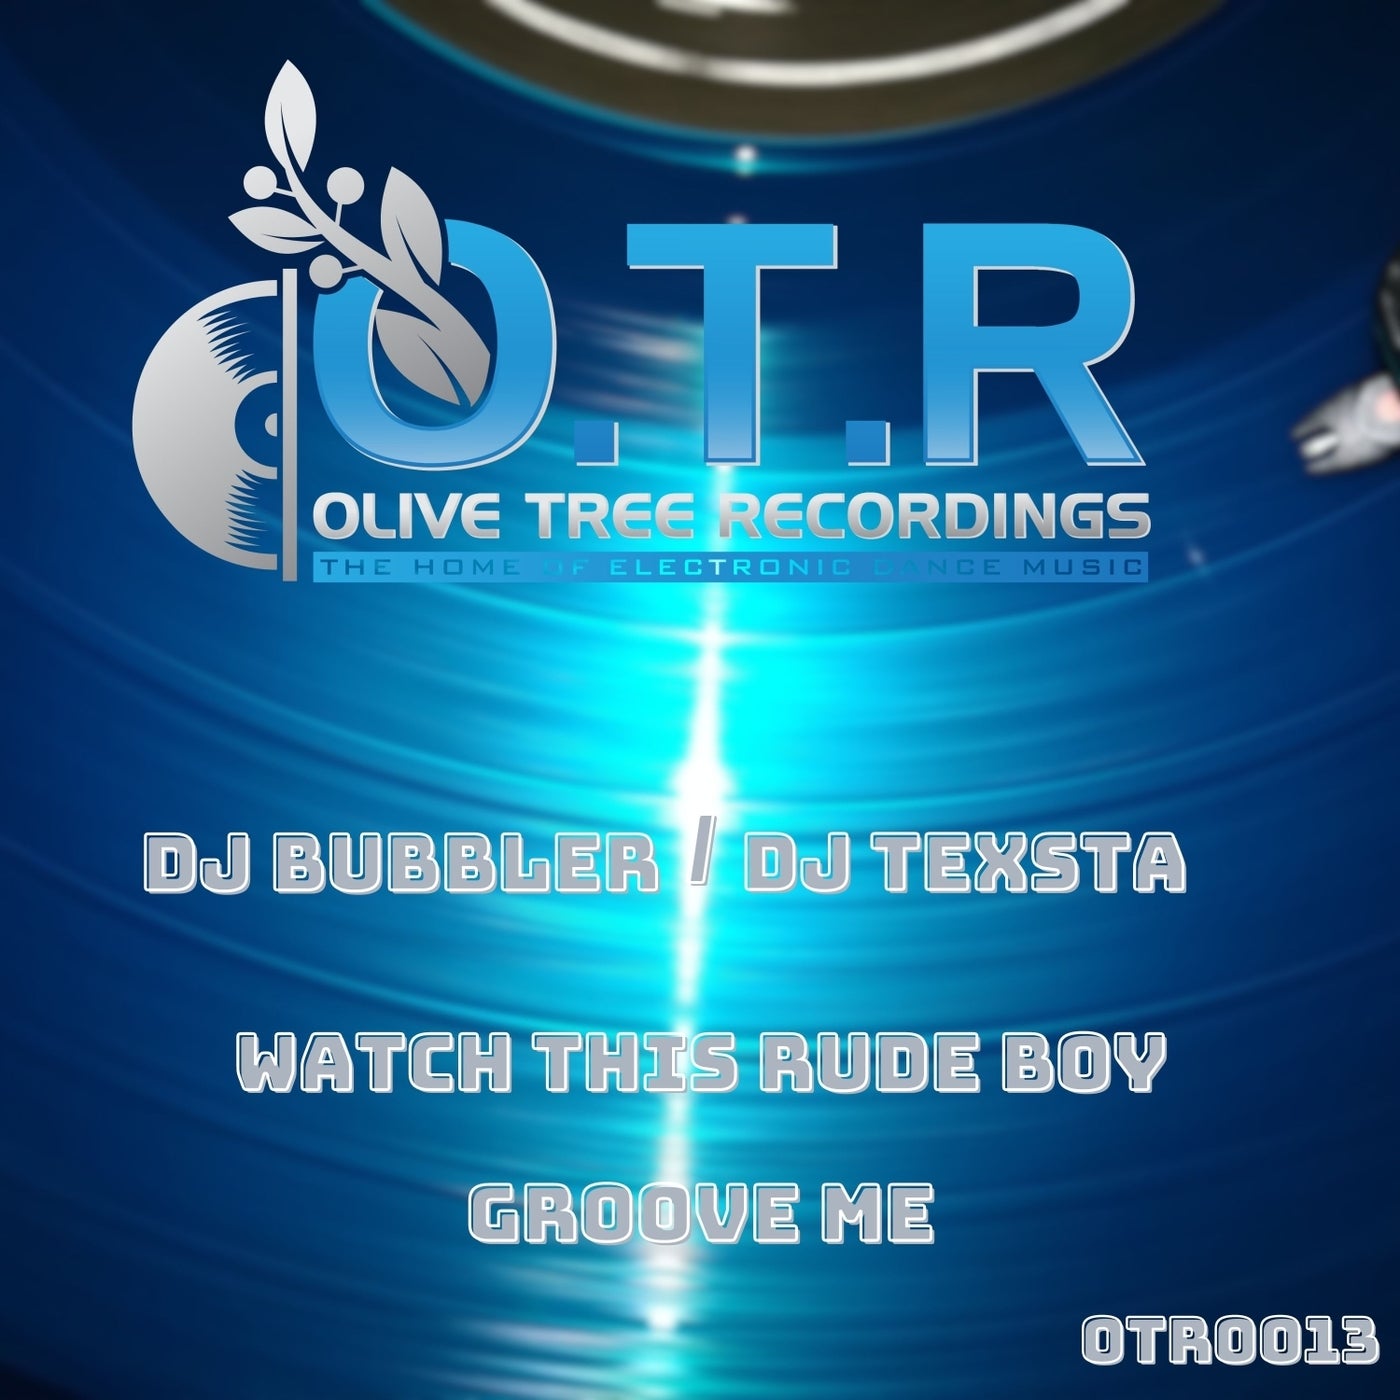 Watch This Rude Boy / Groove Mw